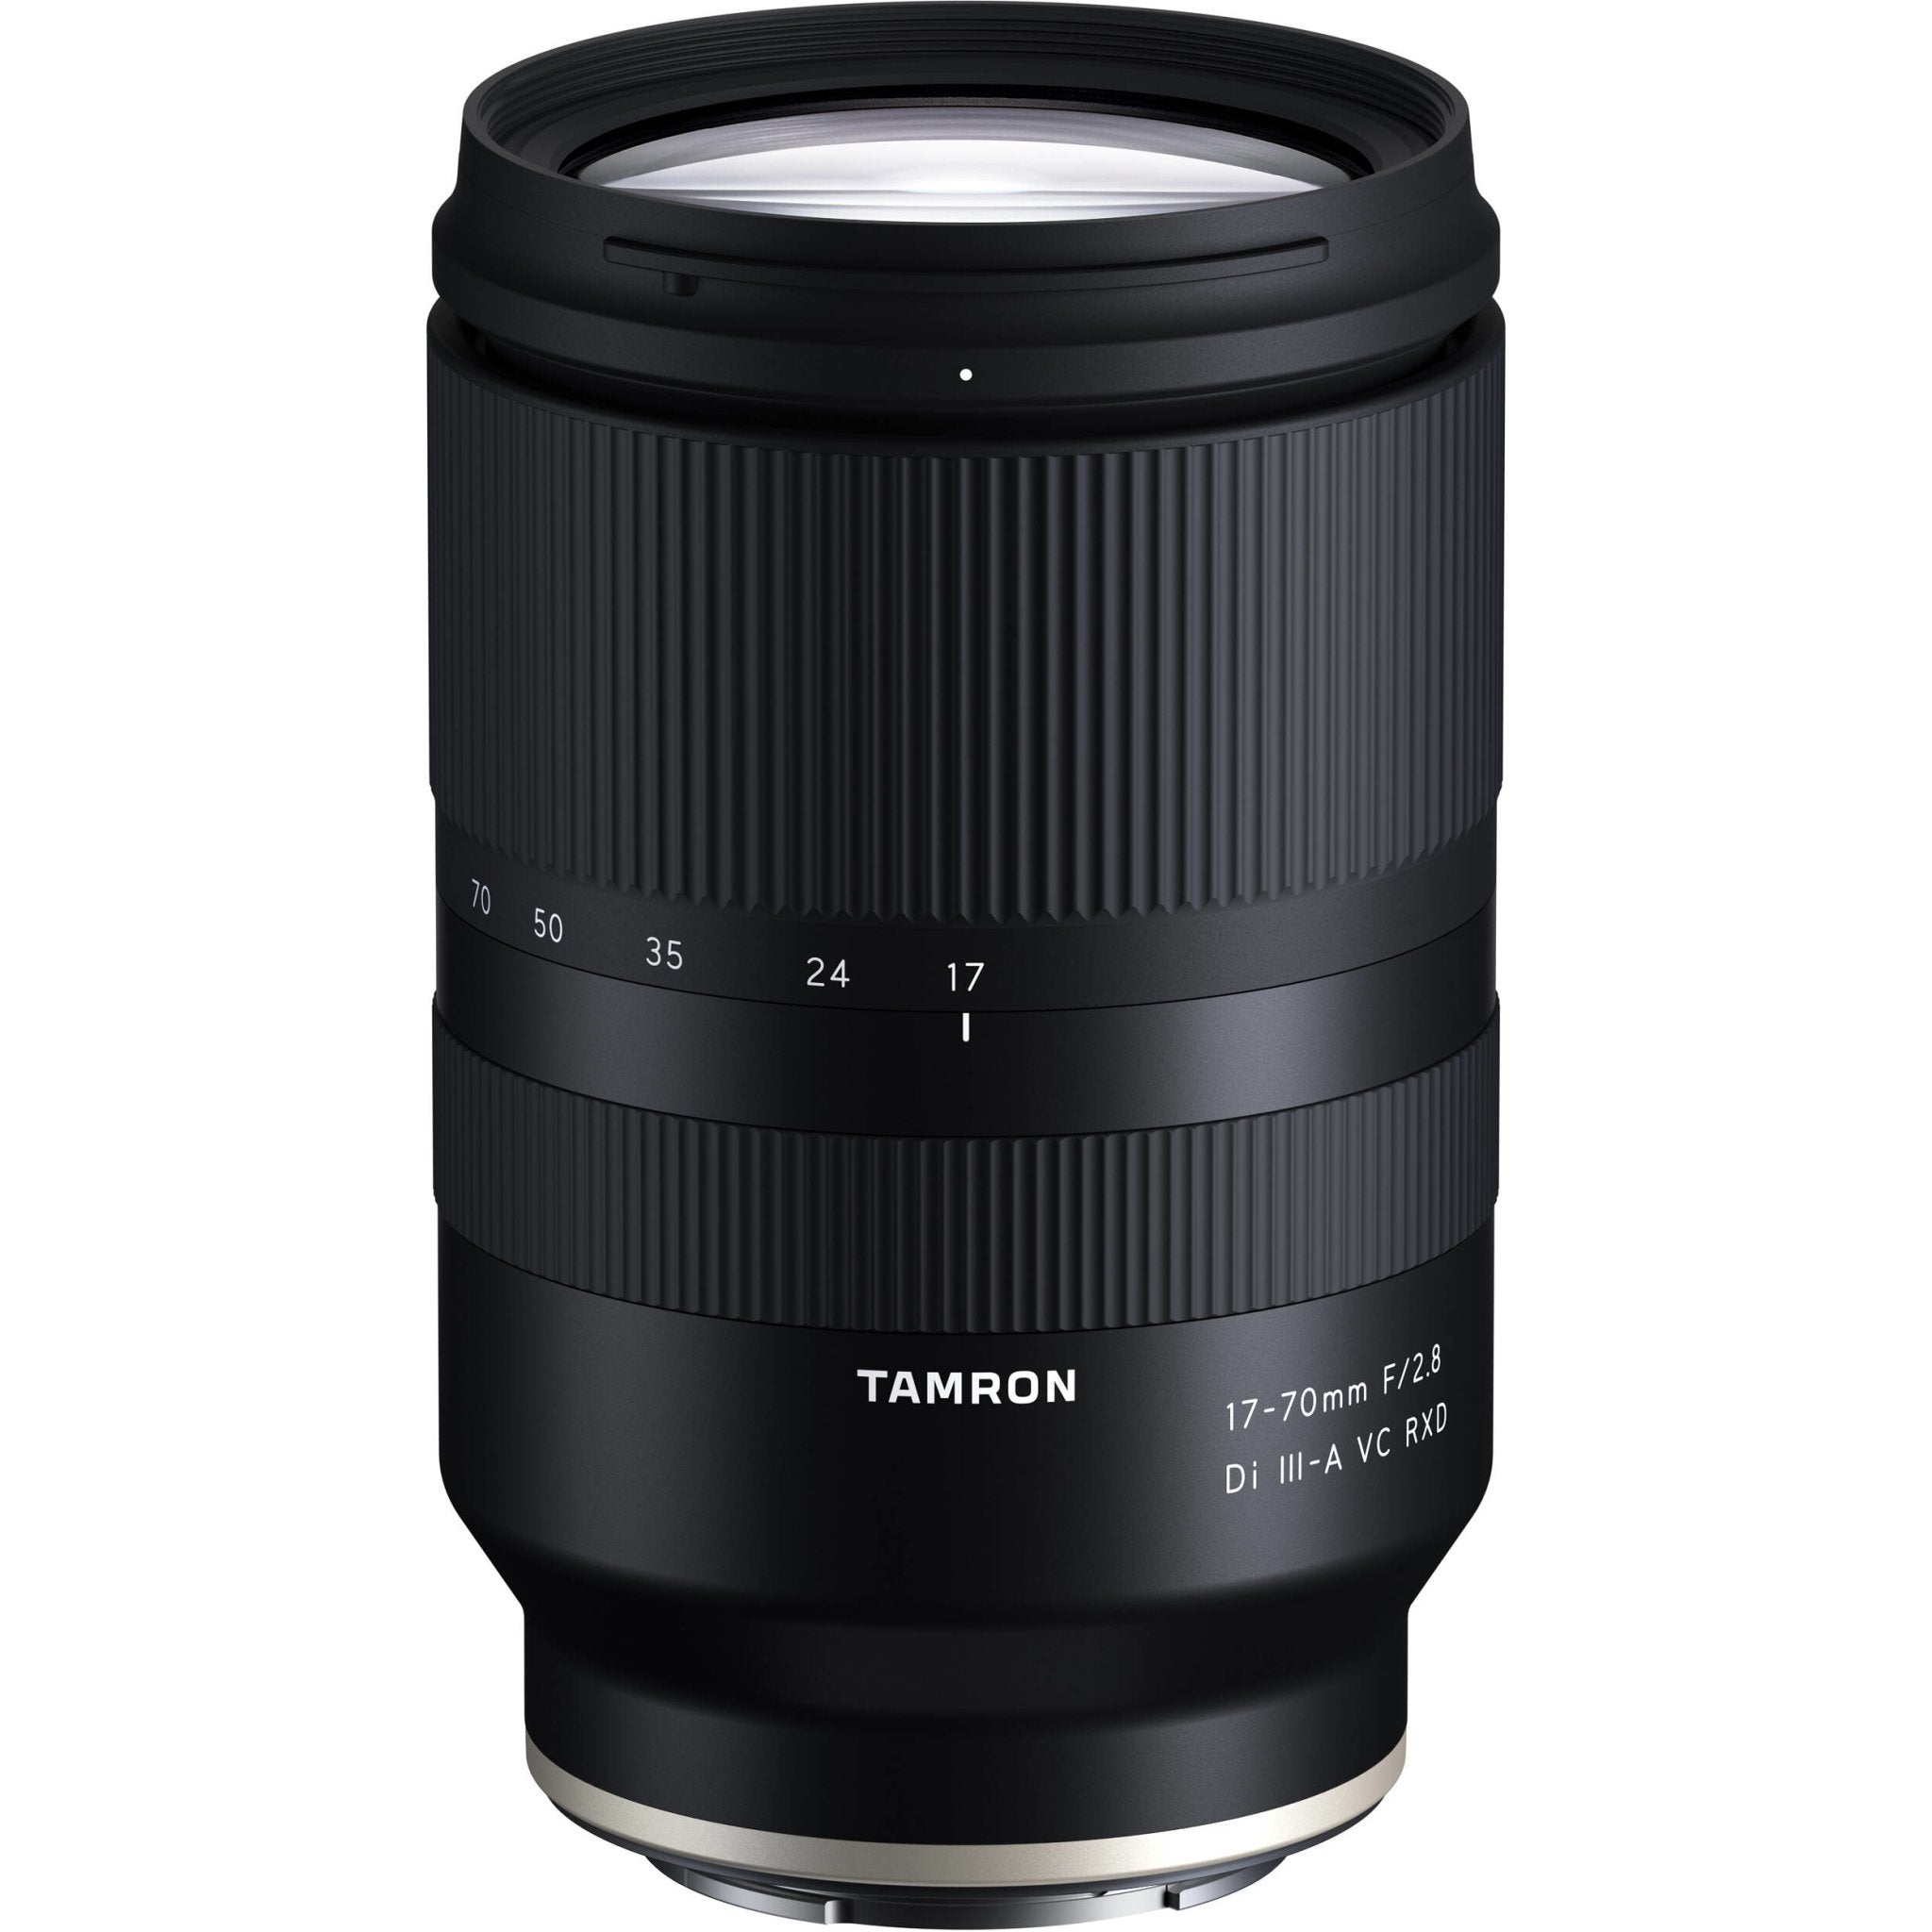 Tamron 17-70mm f/2.8 Di III-A VC RXD Lens for Sony E - The Camerashop